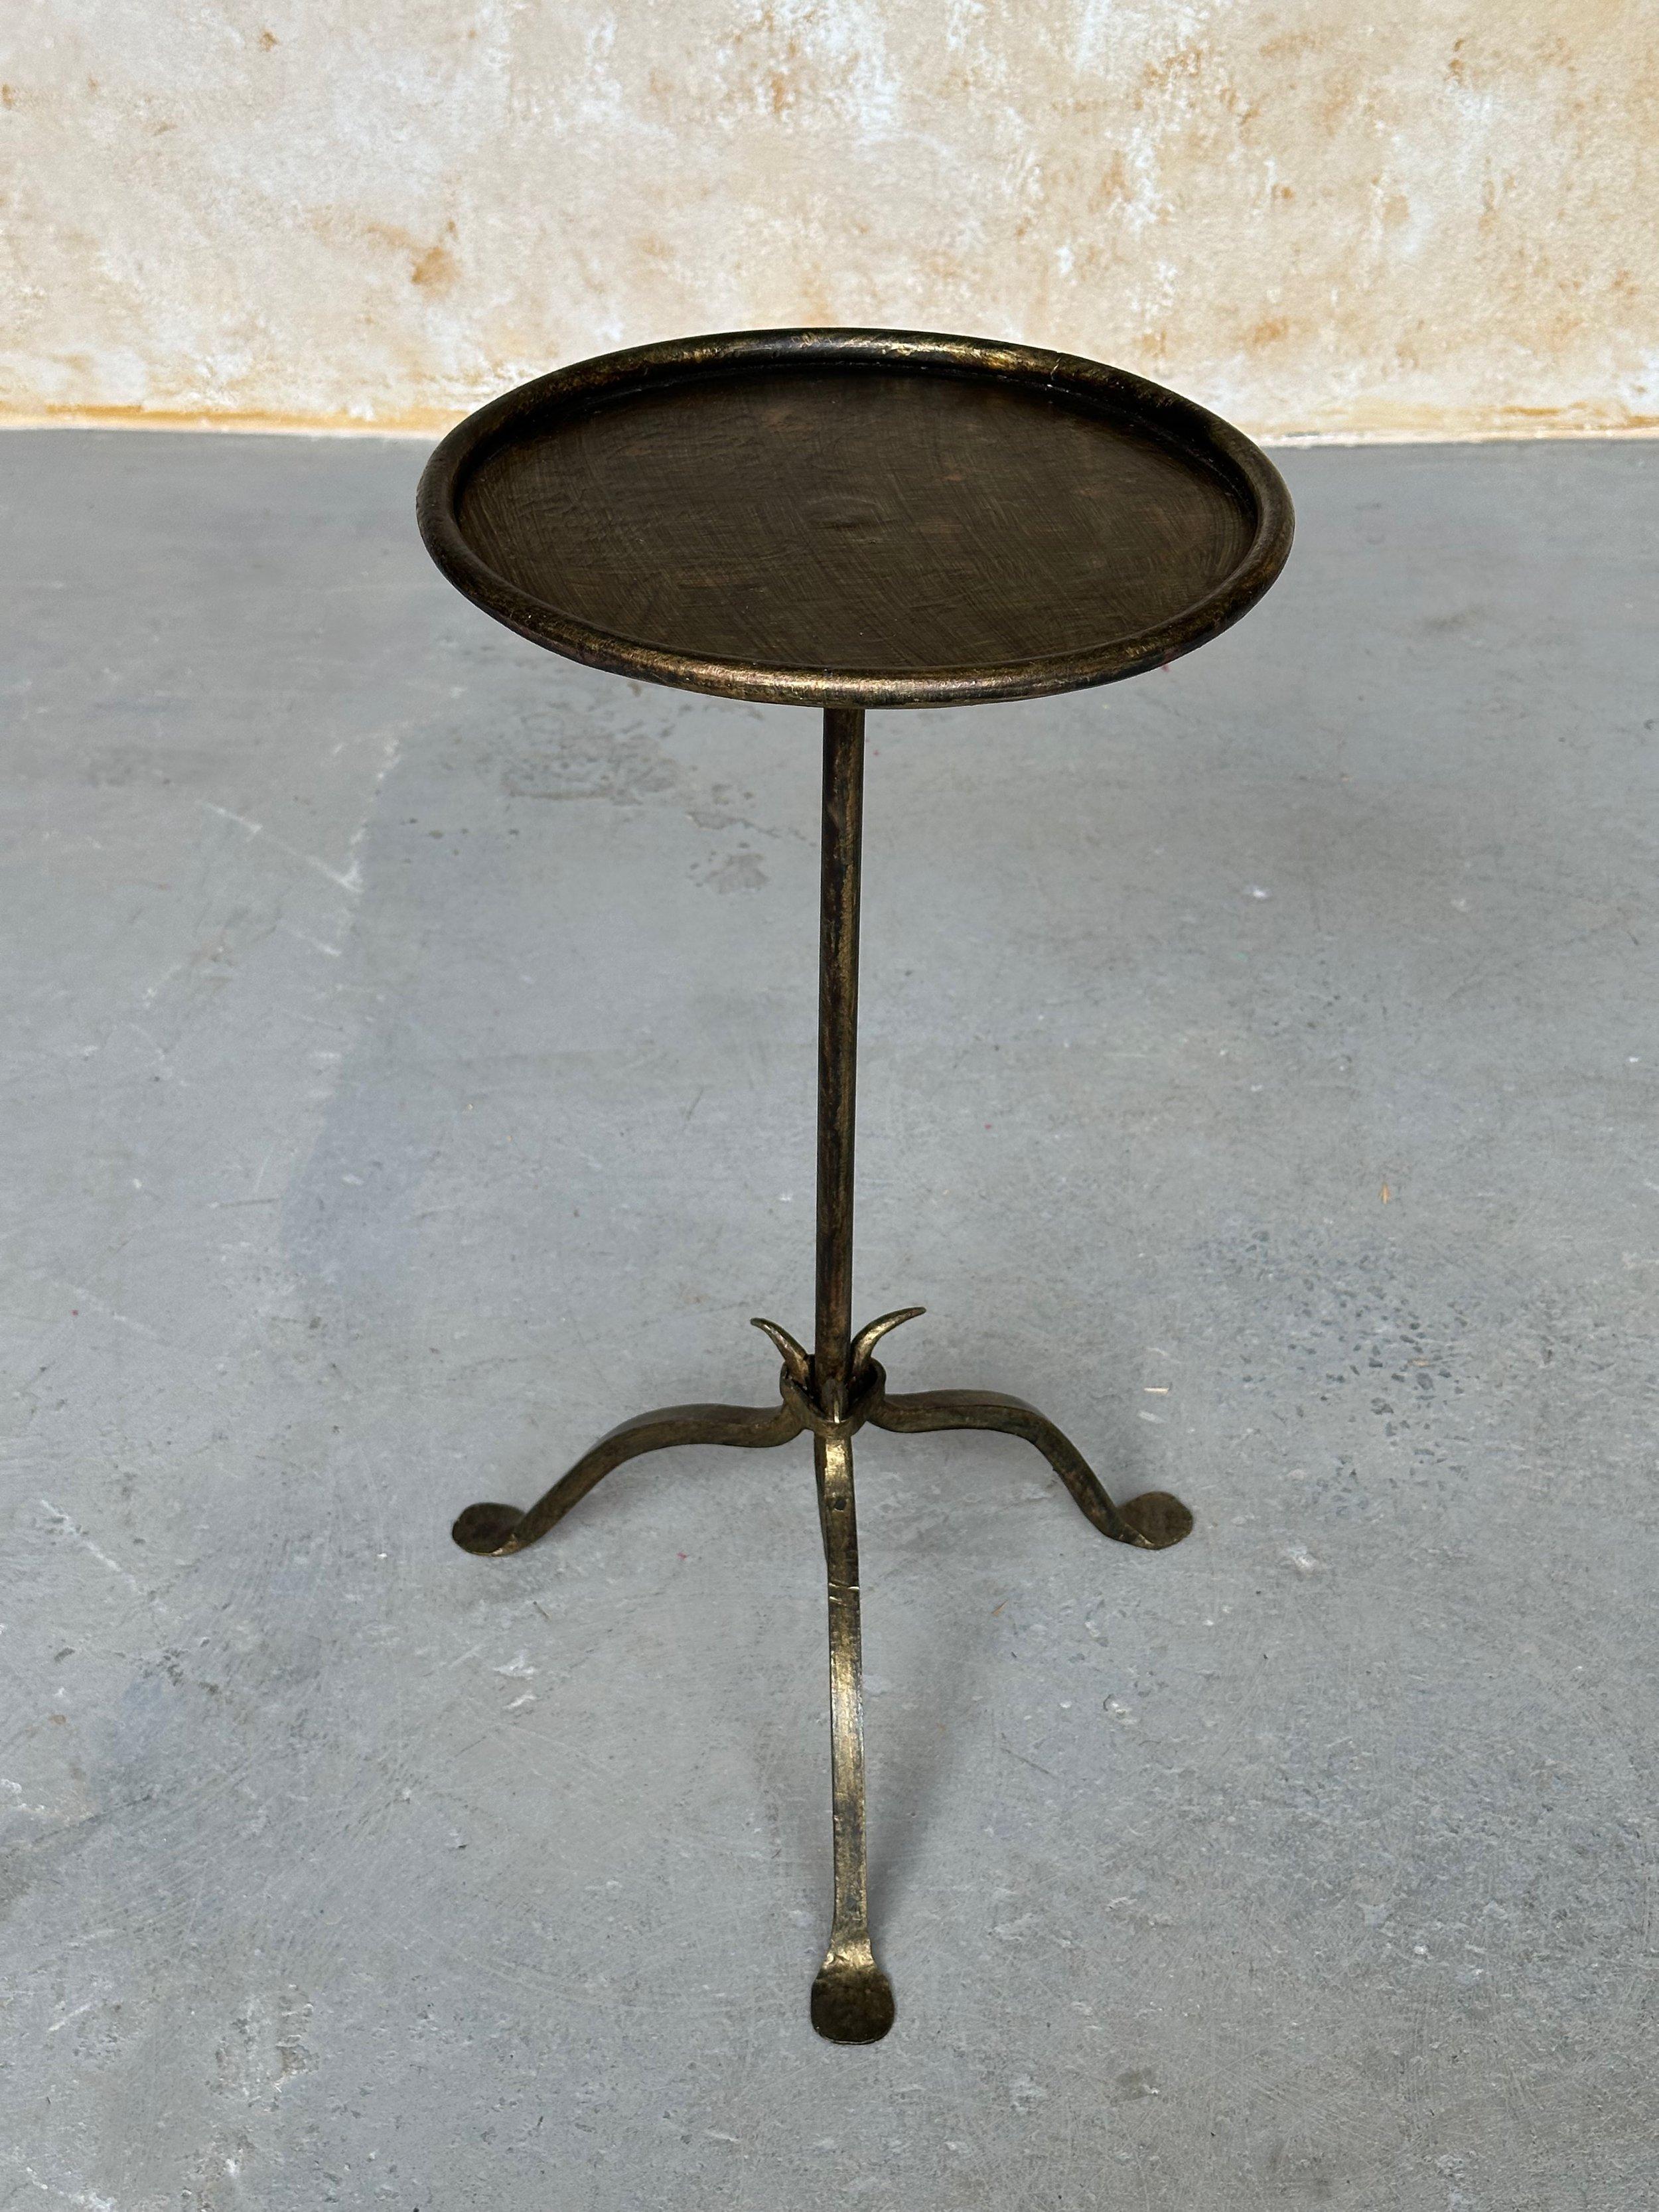 Contemporary Small Gilt Iron Drinks Table With Tripod Base For Sale